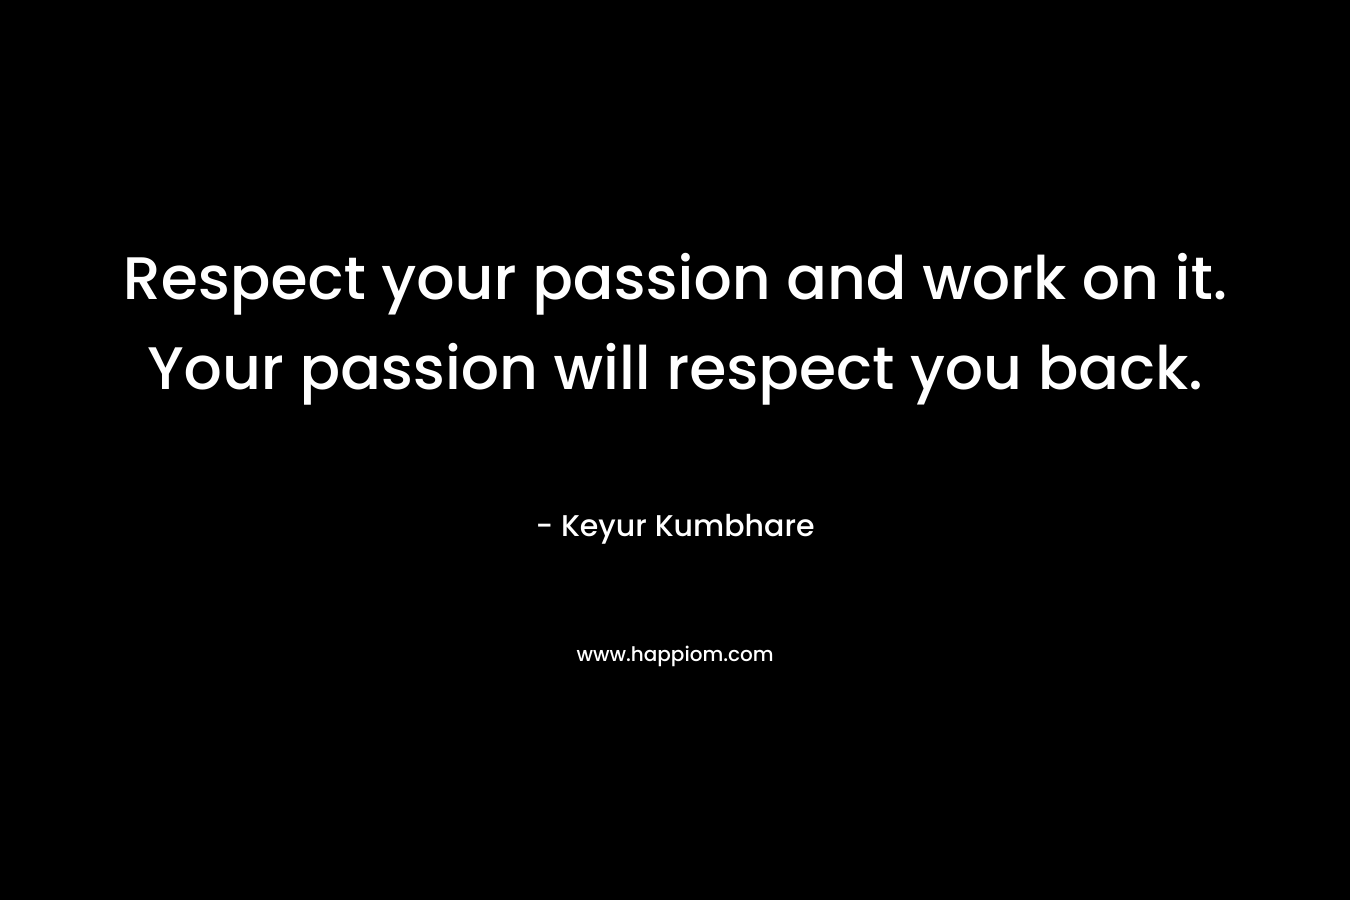 Respect your passion and work on it. Your passion will respect you back. – Keyur Kumbhare